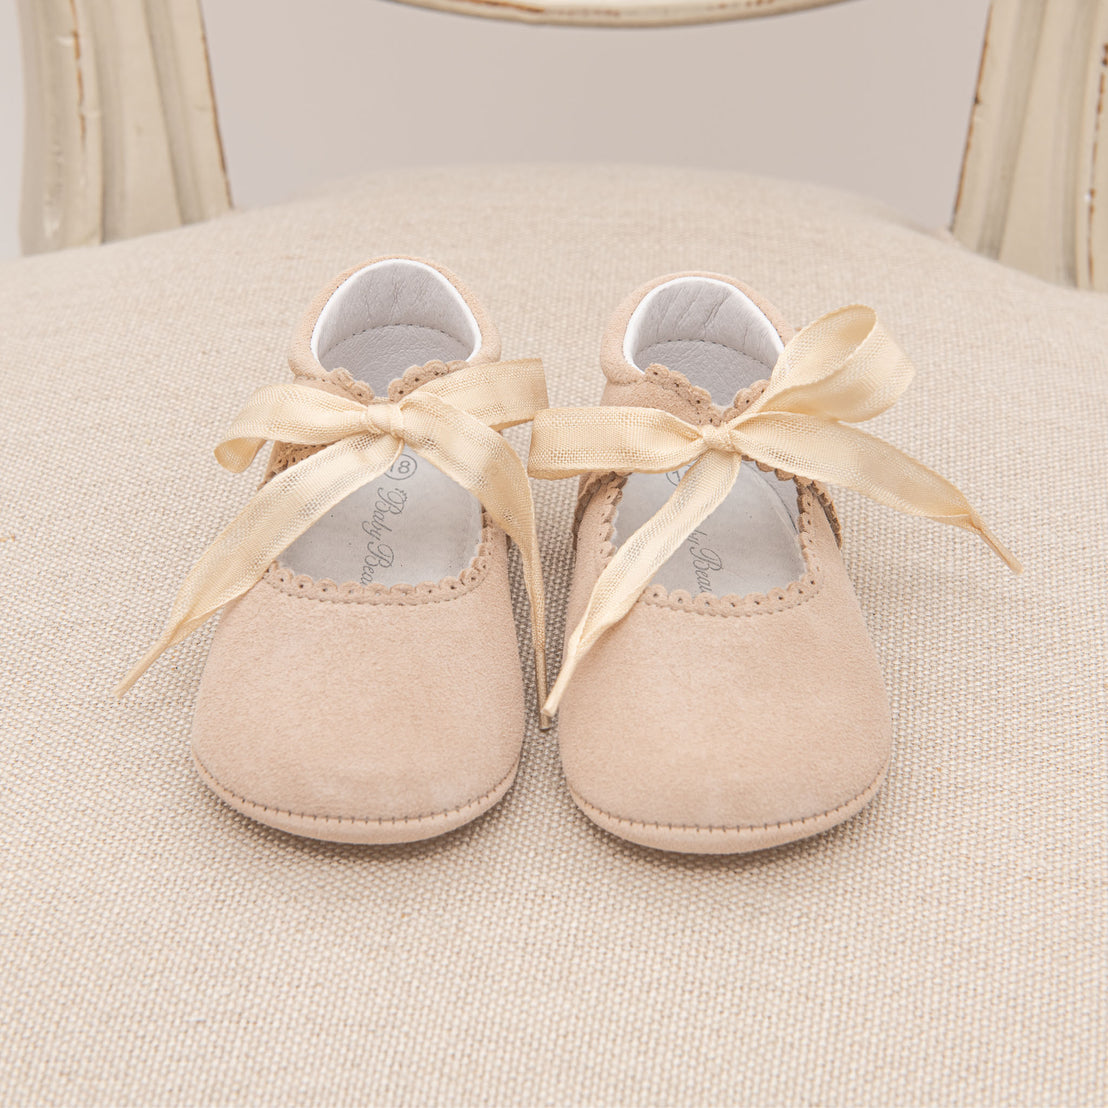 A pair of small beige Kristina Tie Mary Janes with yellow ribbons on a beige fabric chair, presenting a charming and vintage-inspired appearance.